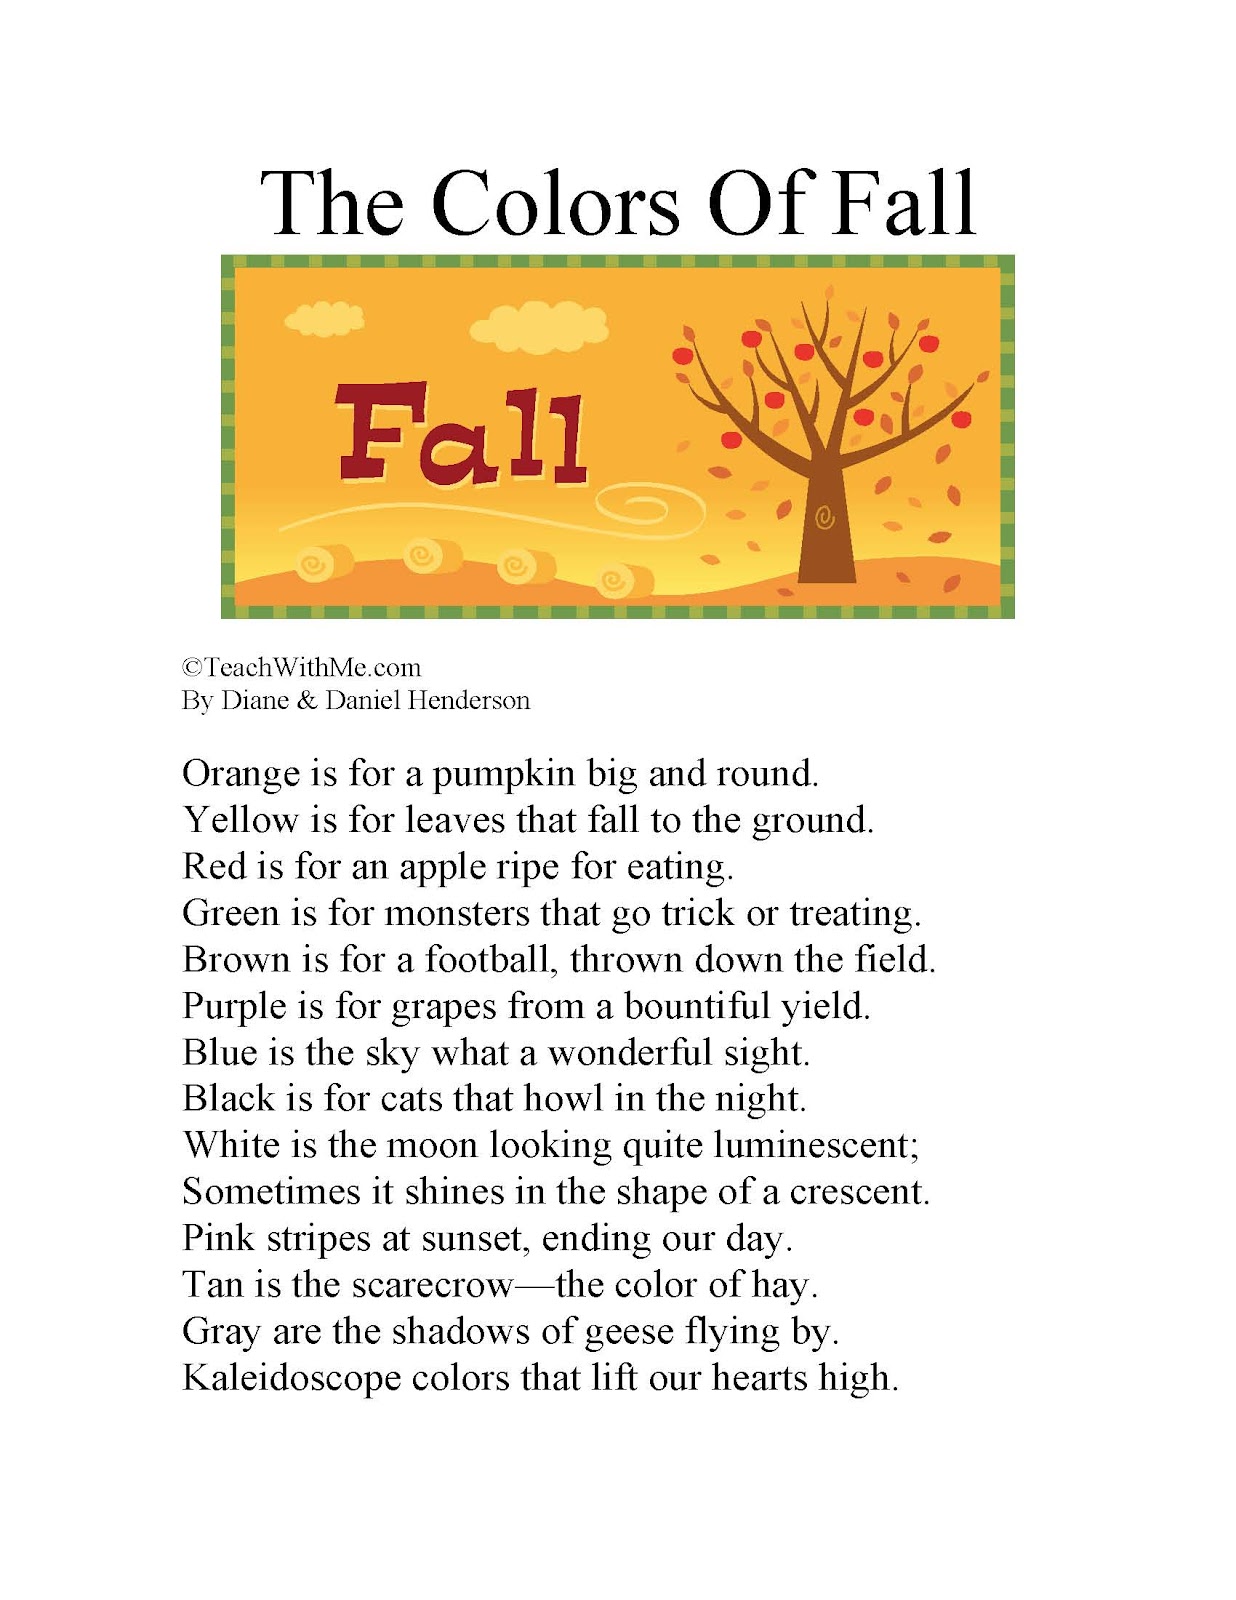 Classroom Freebies: The Colors of Fall